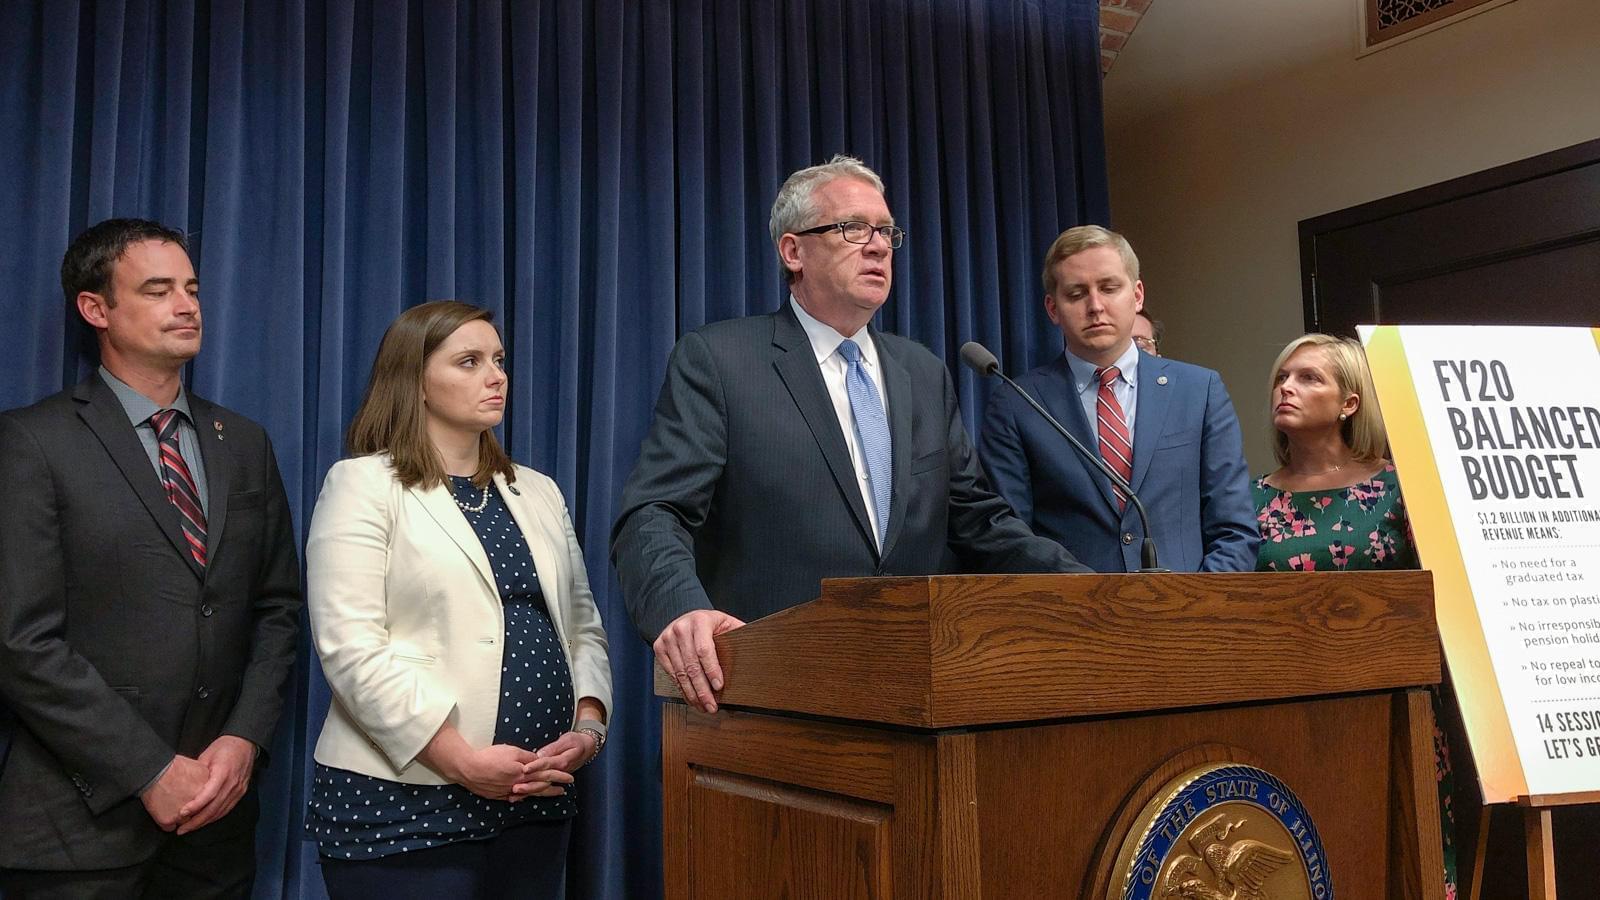 House Minority Leader Jim Durkin, at podium, addresses the media with other Republicans Thursday in the Illinois Statehouse.